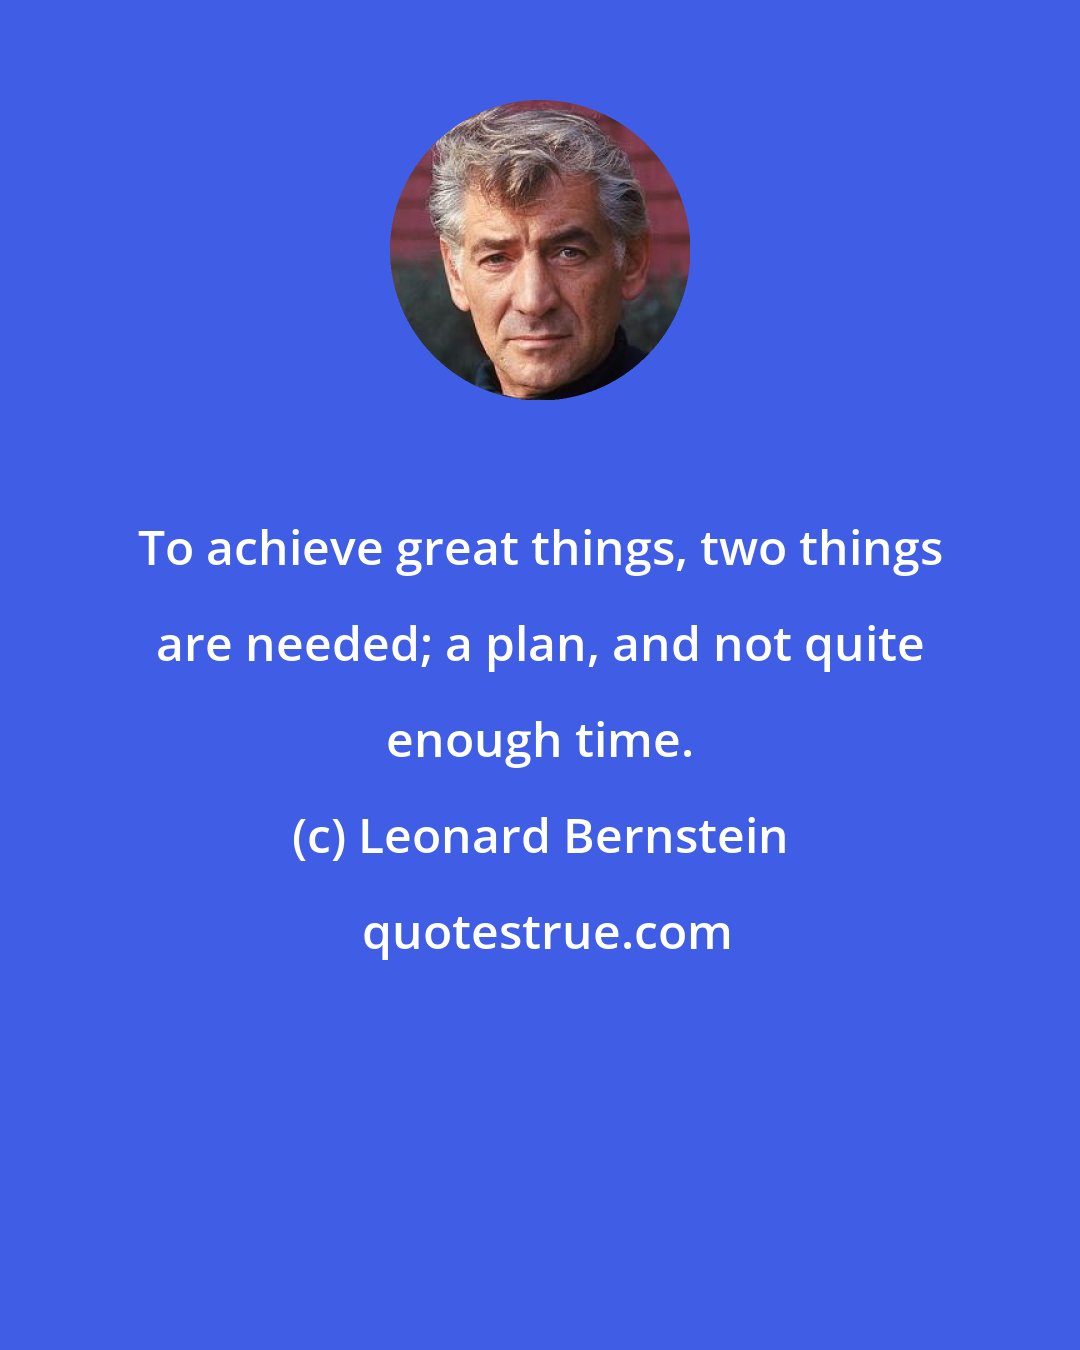 Leonard Bernstein: To achieve great things, two things are needed; a plan, and not quite enough time.